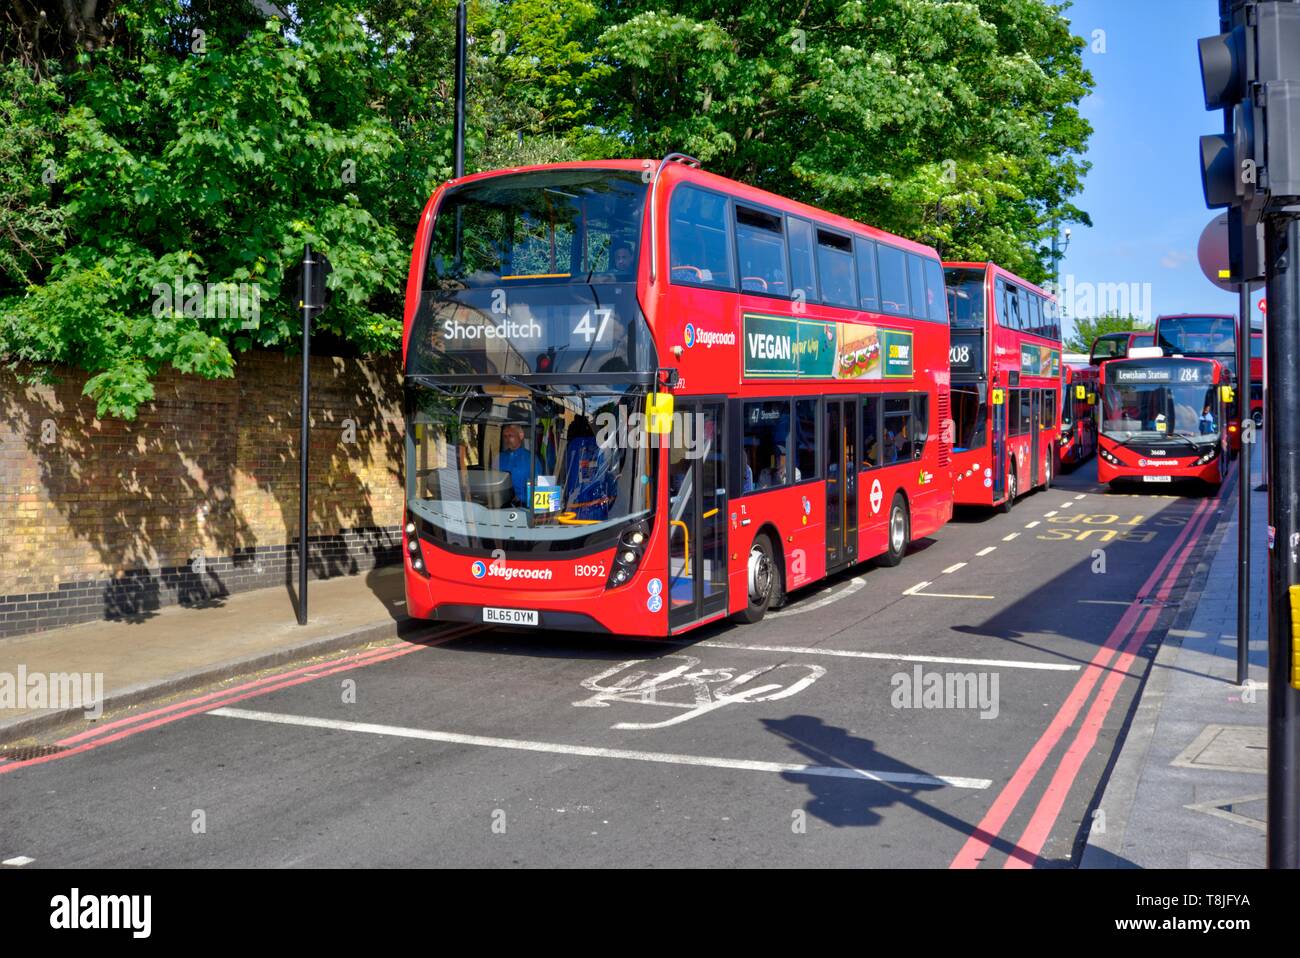 London, United Kingdom - May 13, 2019: Double decker buses line up at traffic lights waiting to leave Lewisham railway station Stock Photo